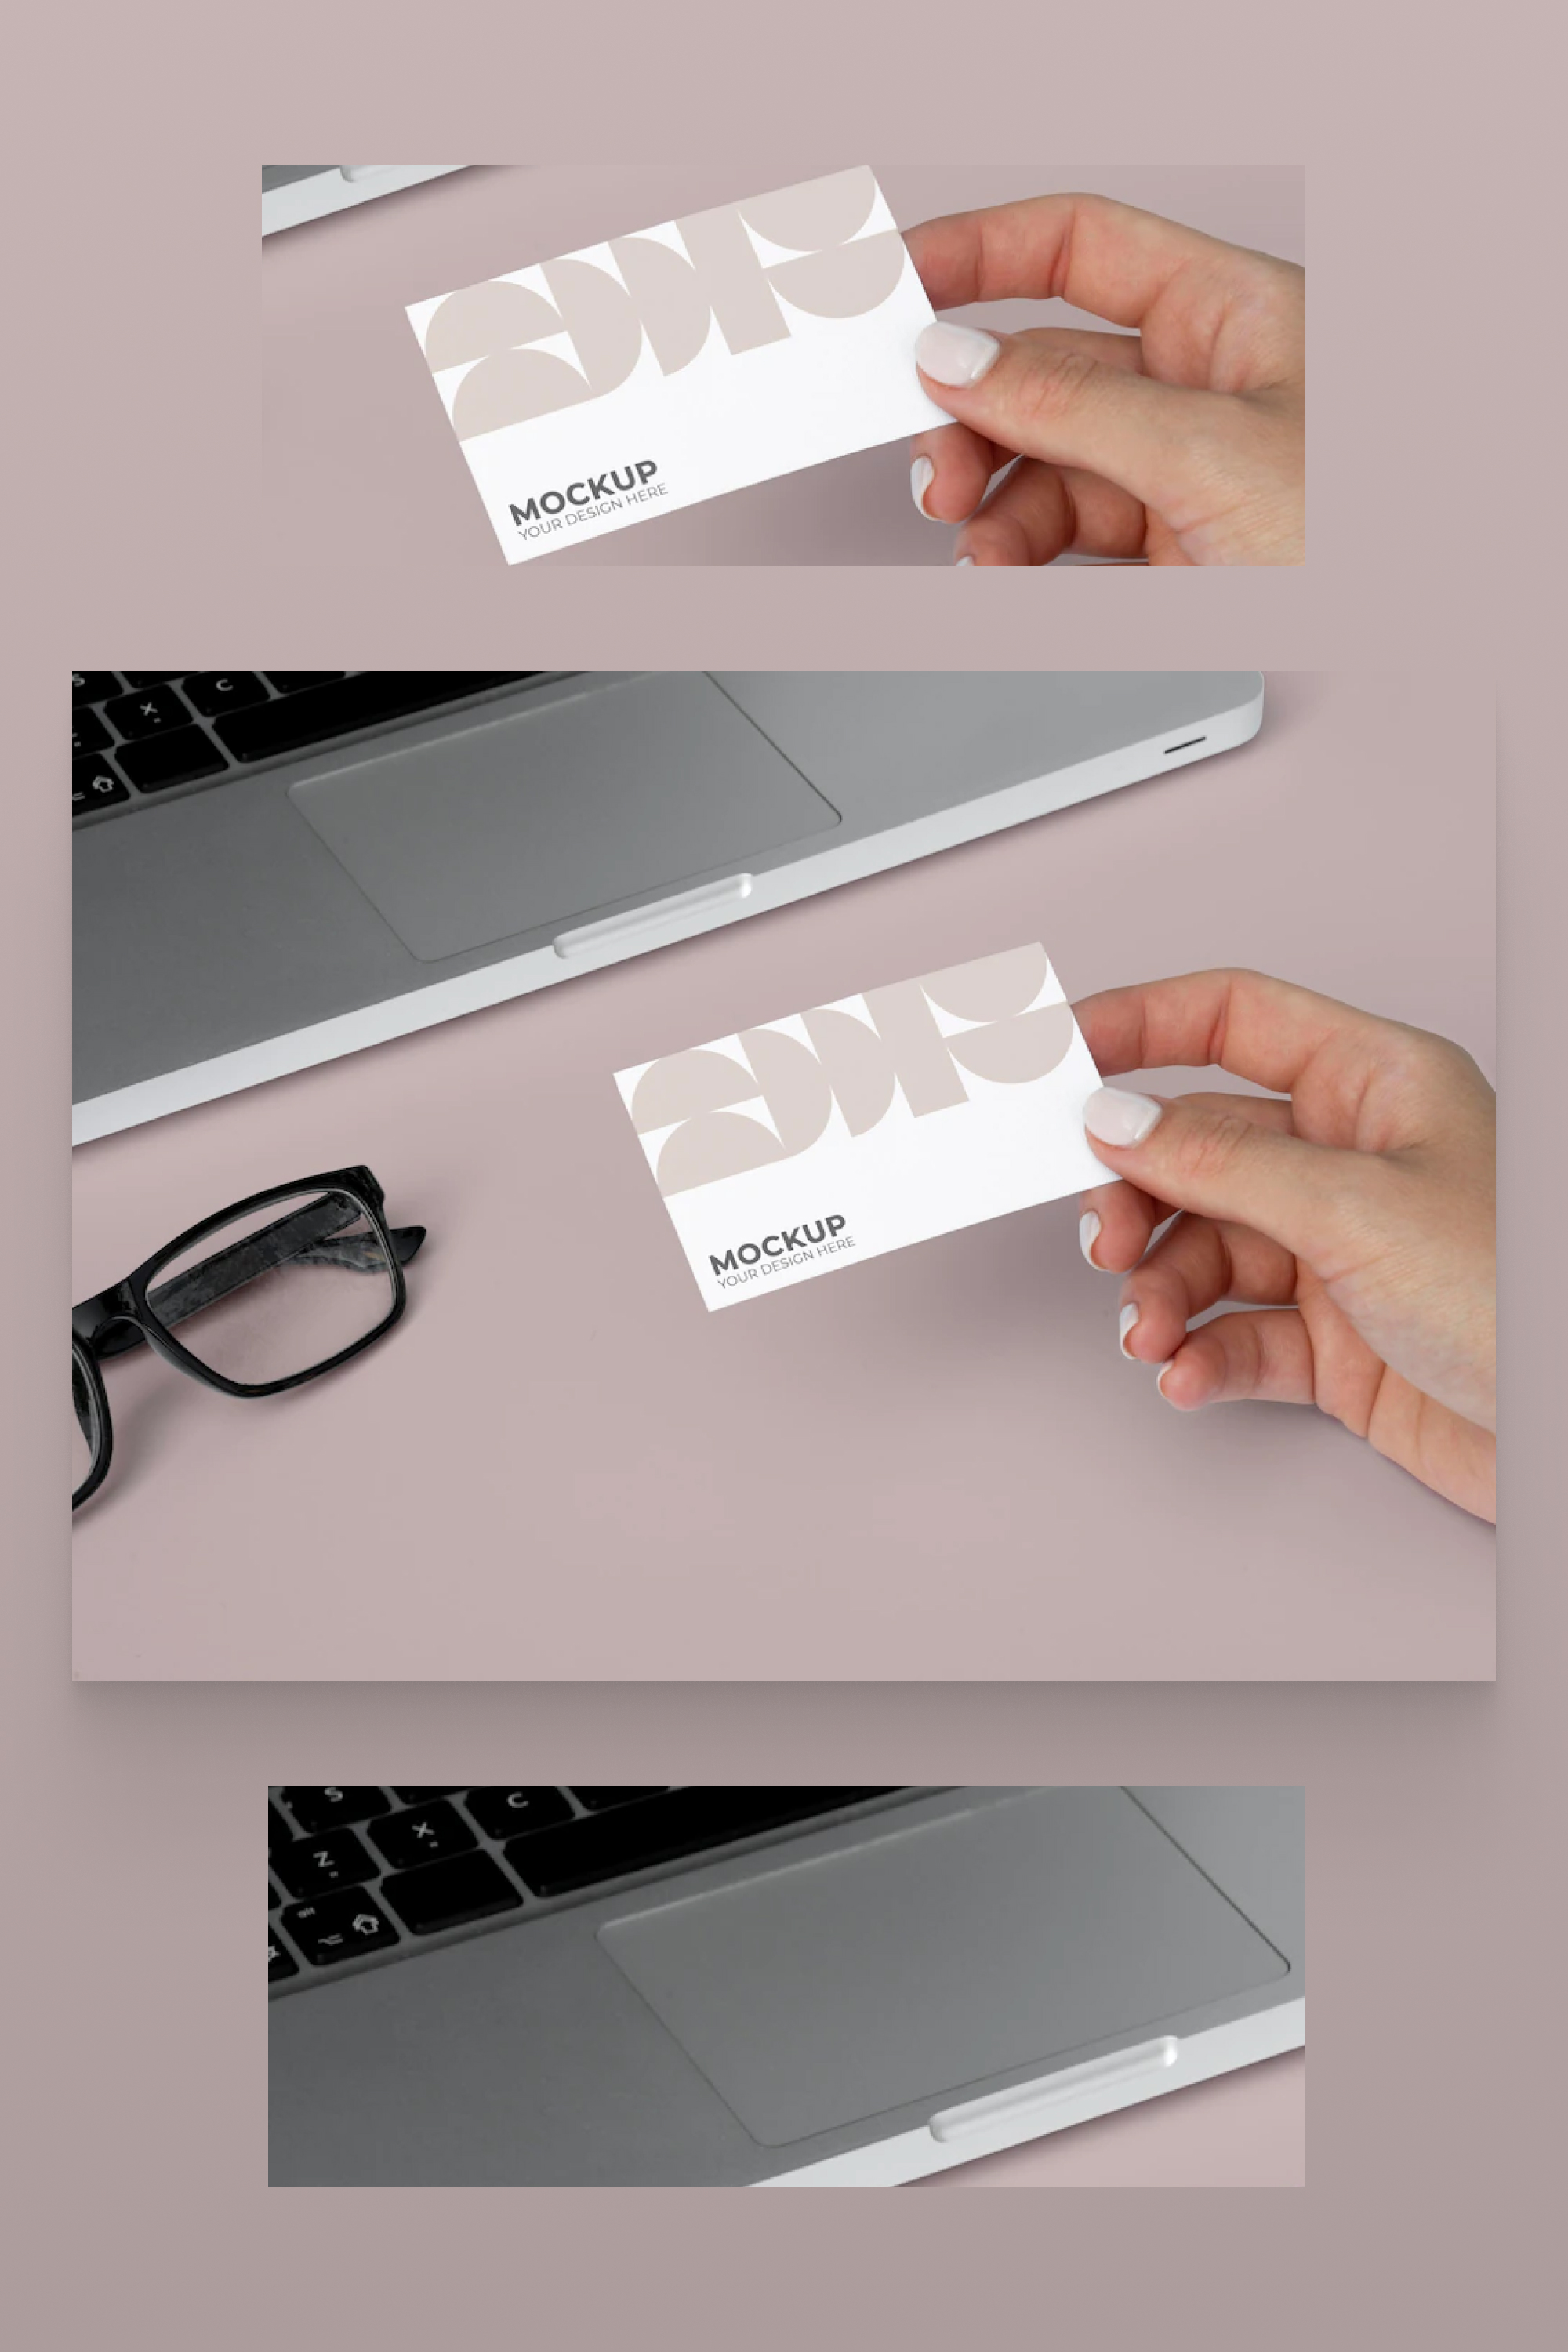 Business cards in hand on pink background with laptop and glasses.